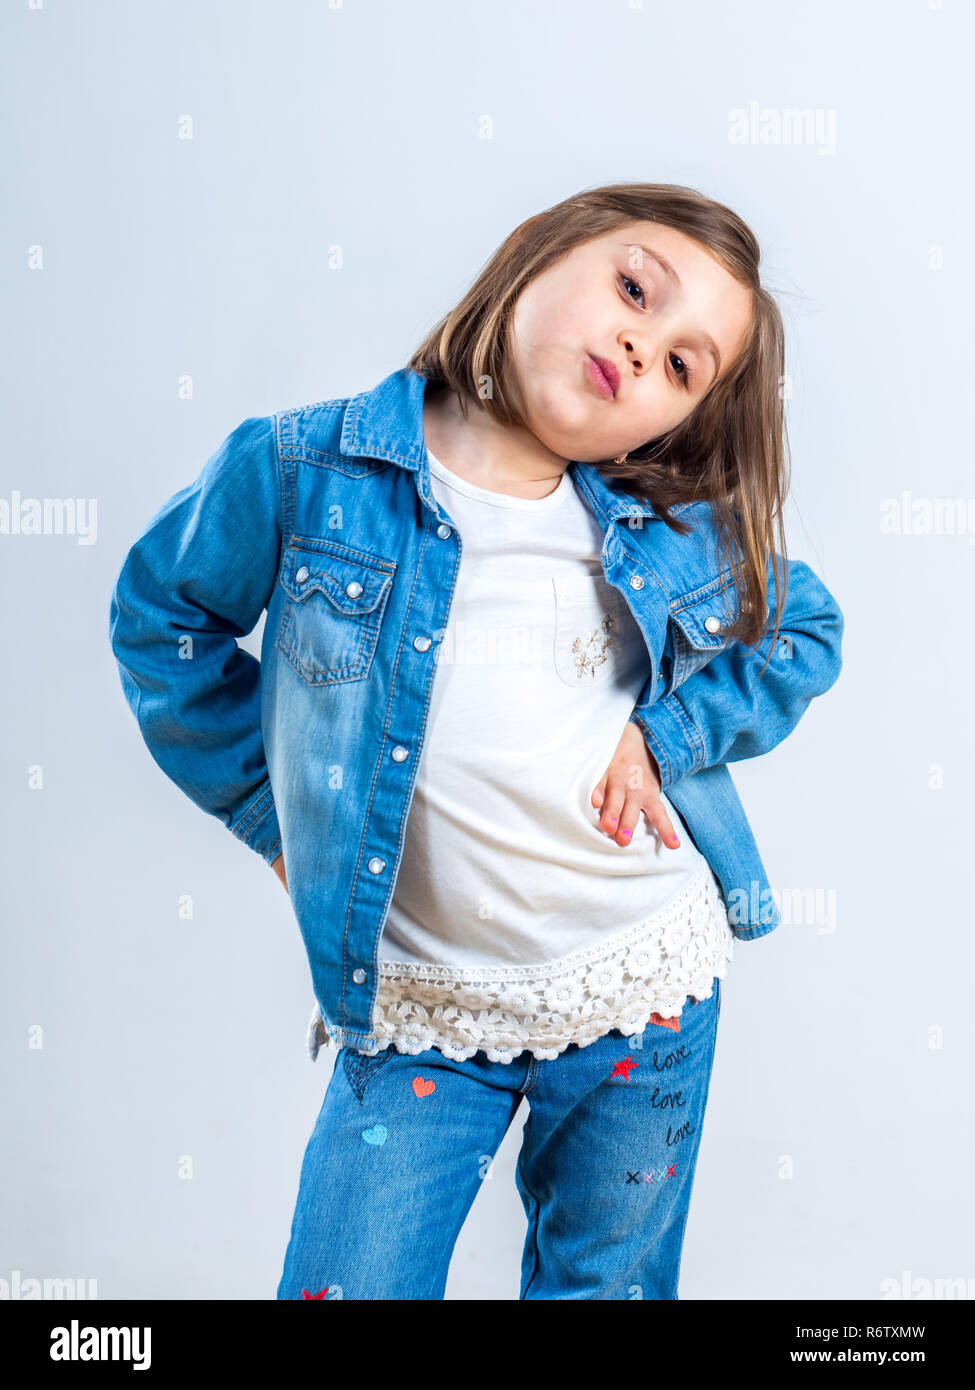 little girl in jeans posing for the camera in the studio Stock Photo - Alamy